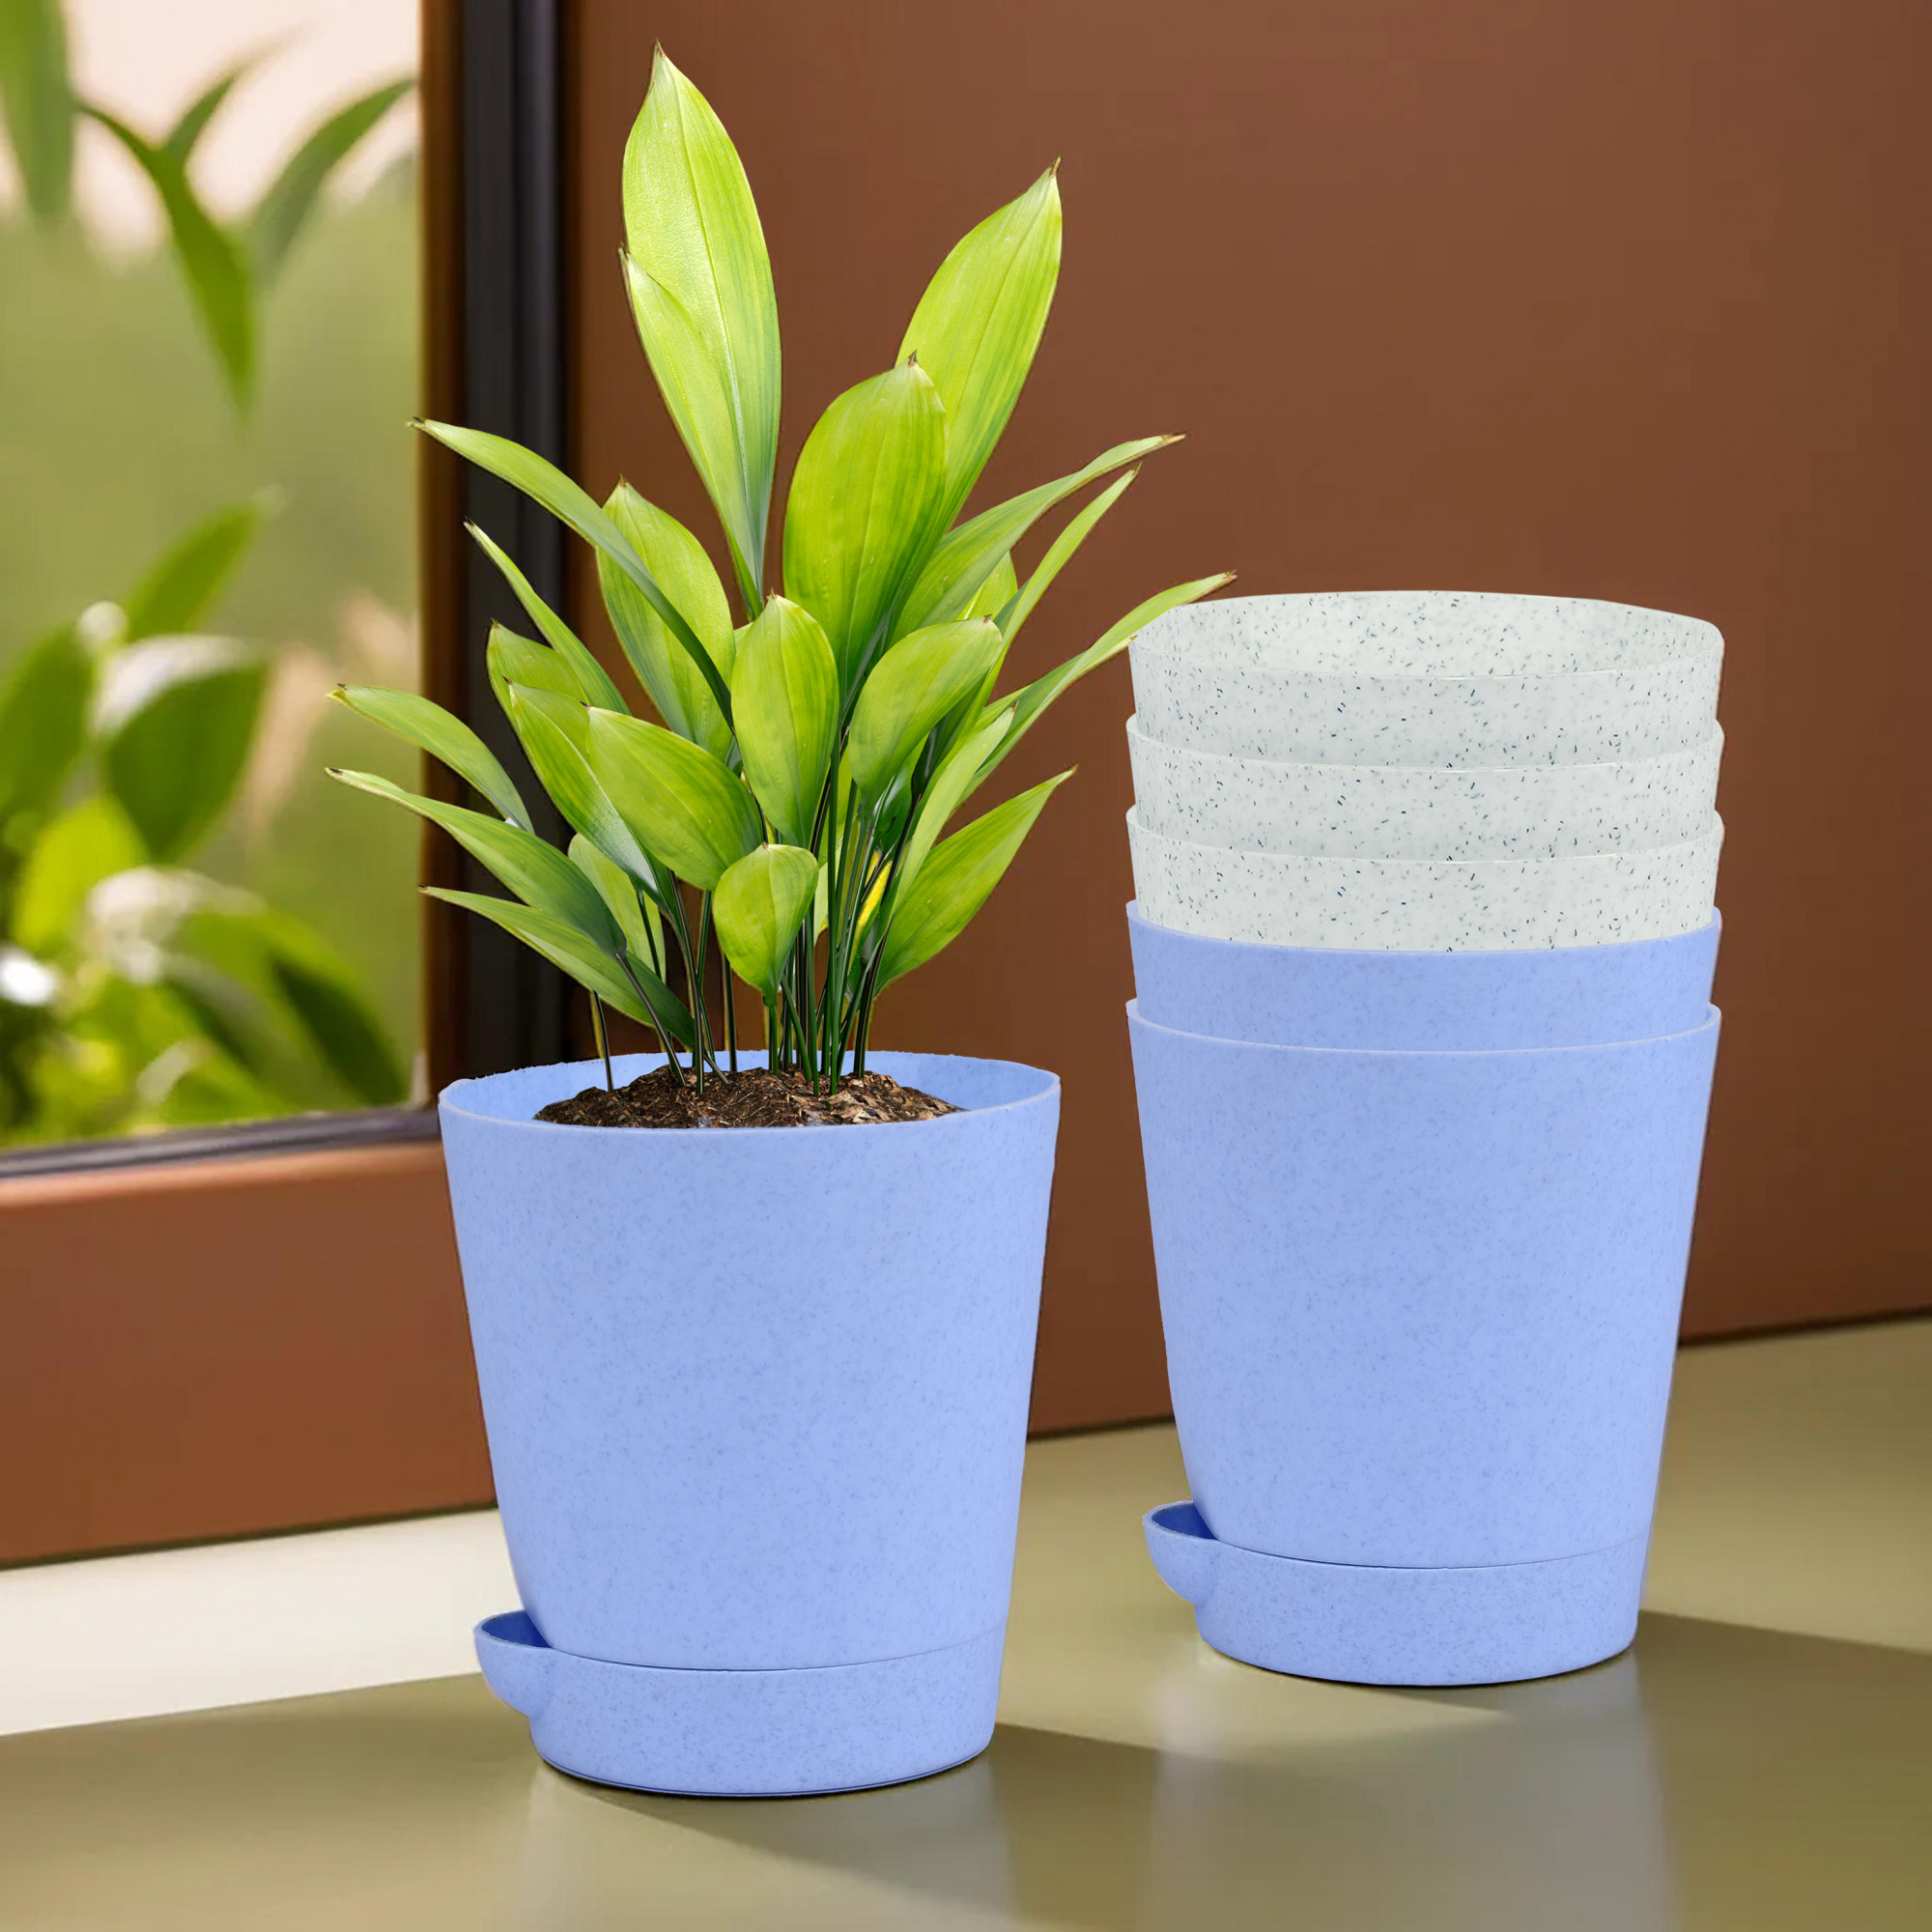 Kuber Industries Flower Pot | Flower Pot for Living Room-Office | Planters for Home-office-Lawns & Garden Décor | Self Watering Flower Planters Pots | Marble Titan | 4 Inch | Blue & White